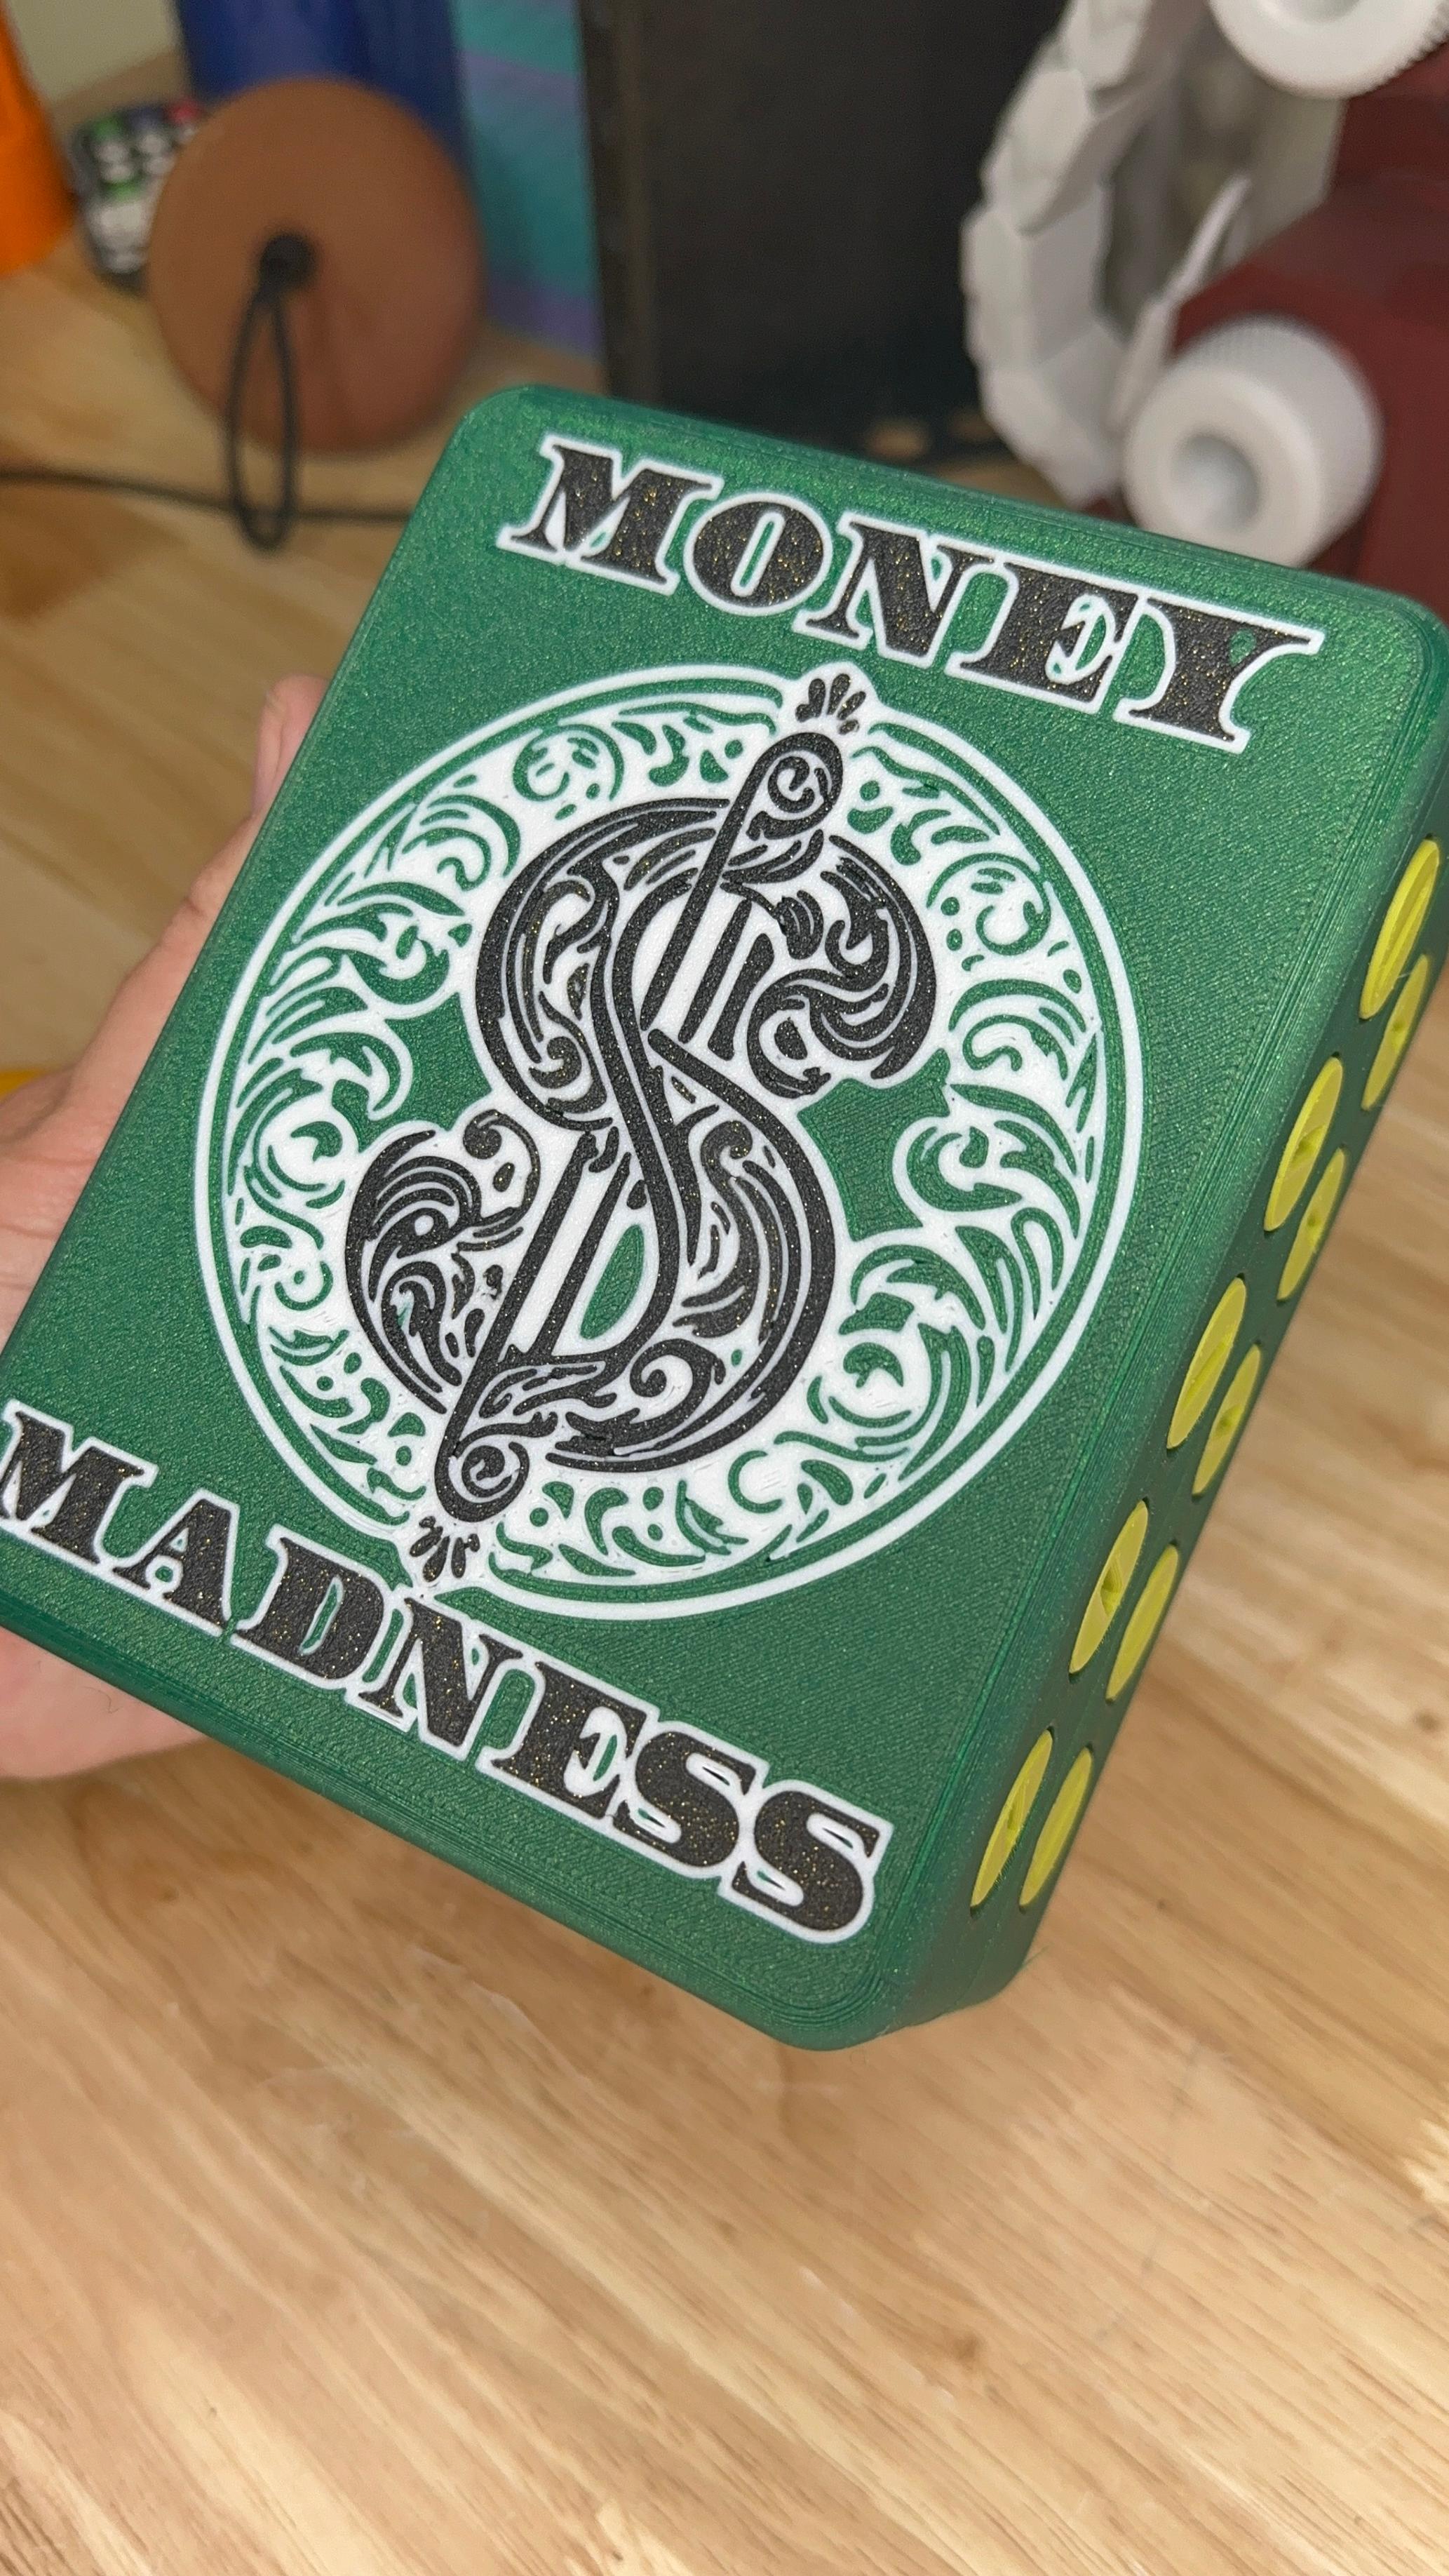 Money Madness Annoying Cash, Card Gift Box - A cash or card gift box for co-workers, friends, family 3d model